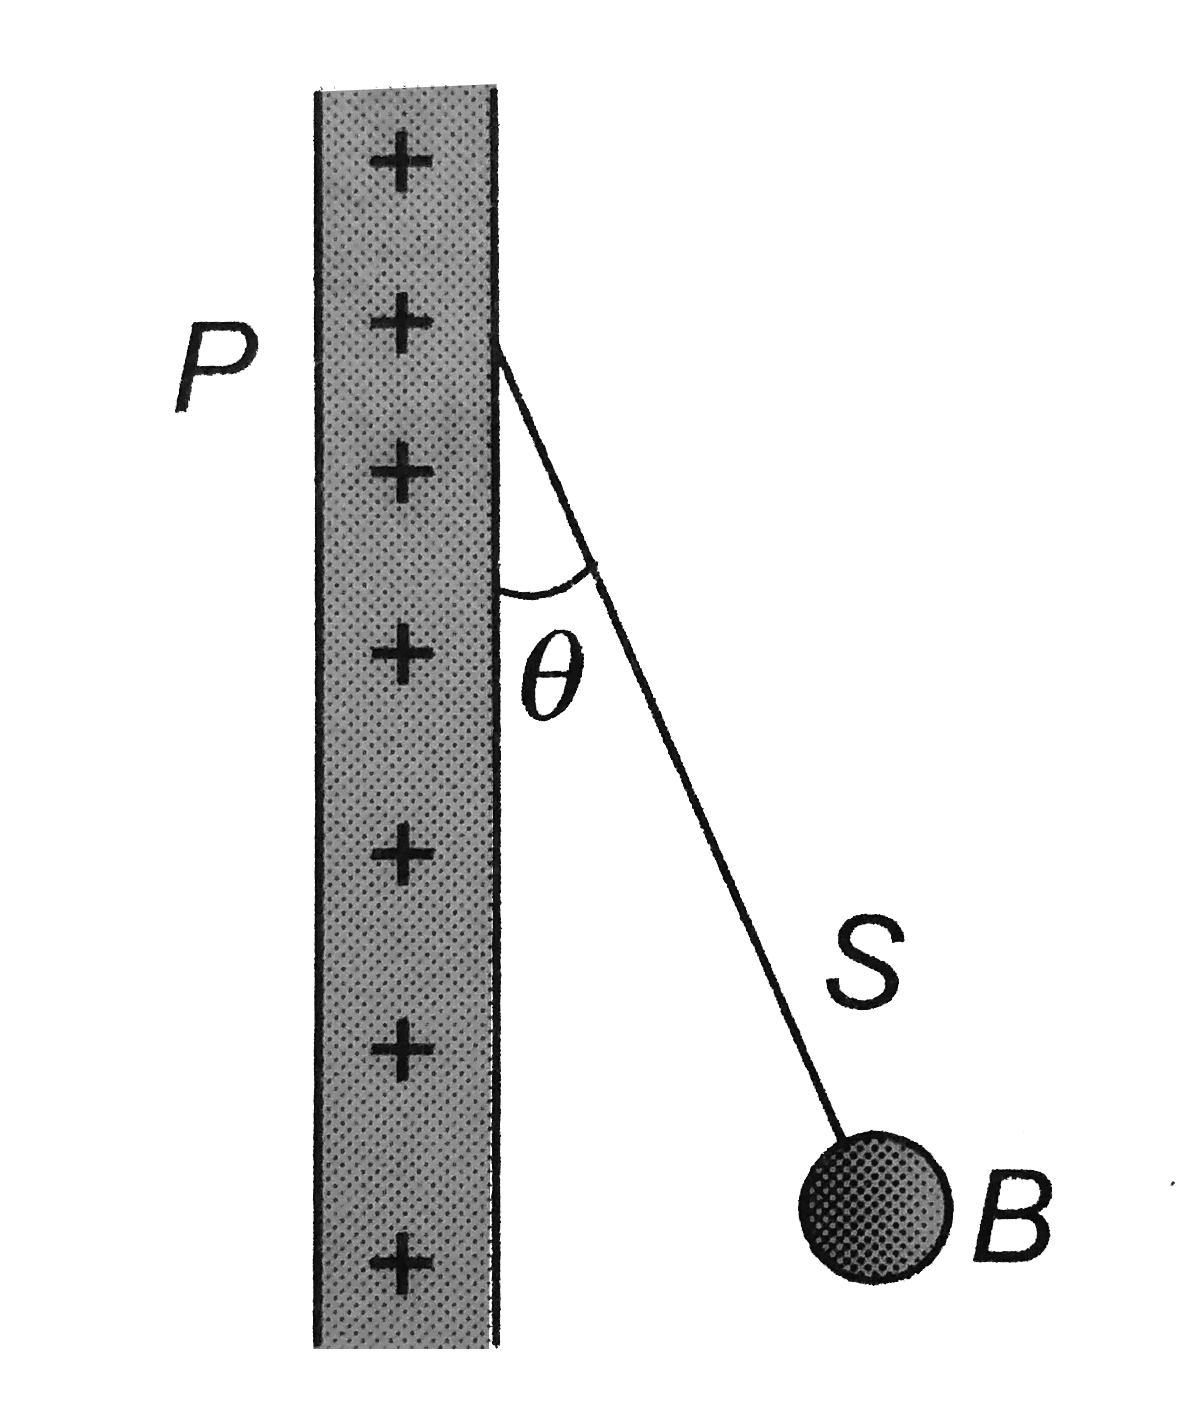 A charged ball B hangs from a silk thread S, which makes an angle theta with a large charged conducting sheet P, as shown in the figure. The surface charge density sigma of the sheet is proportional to